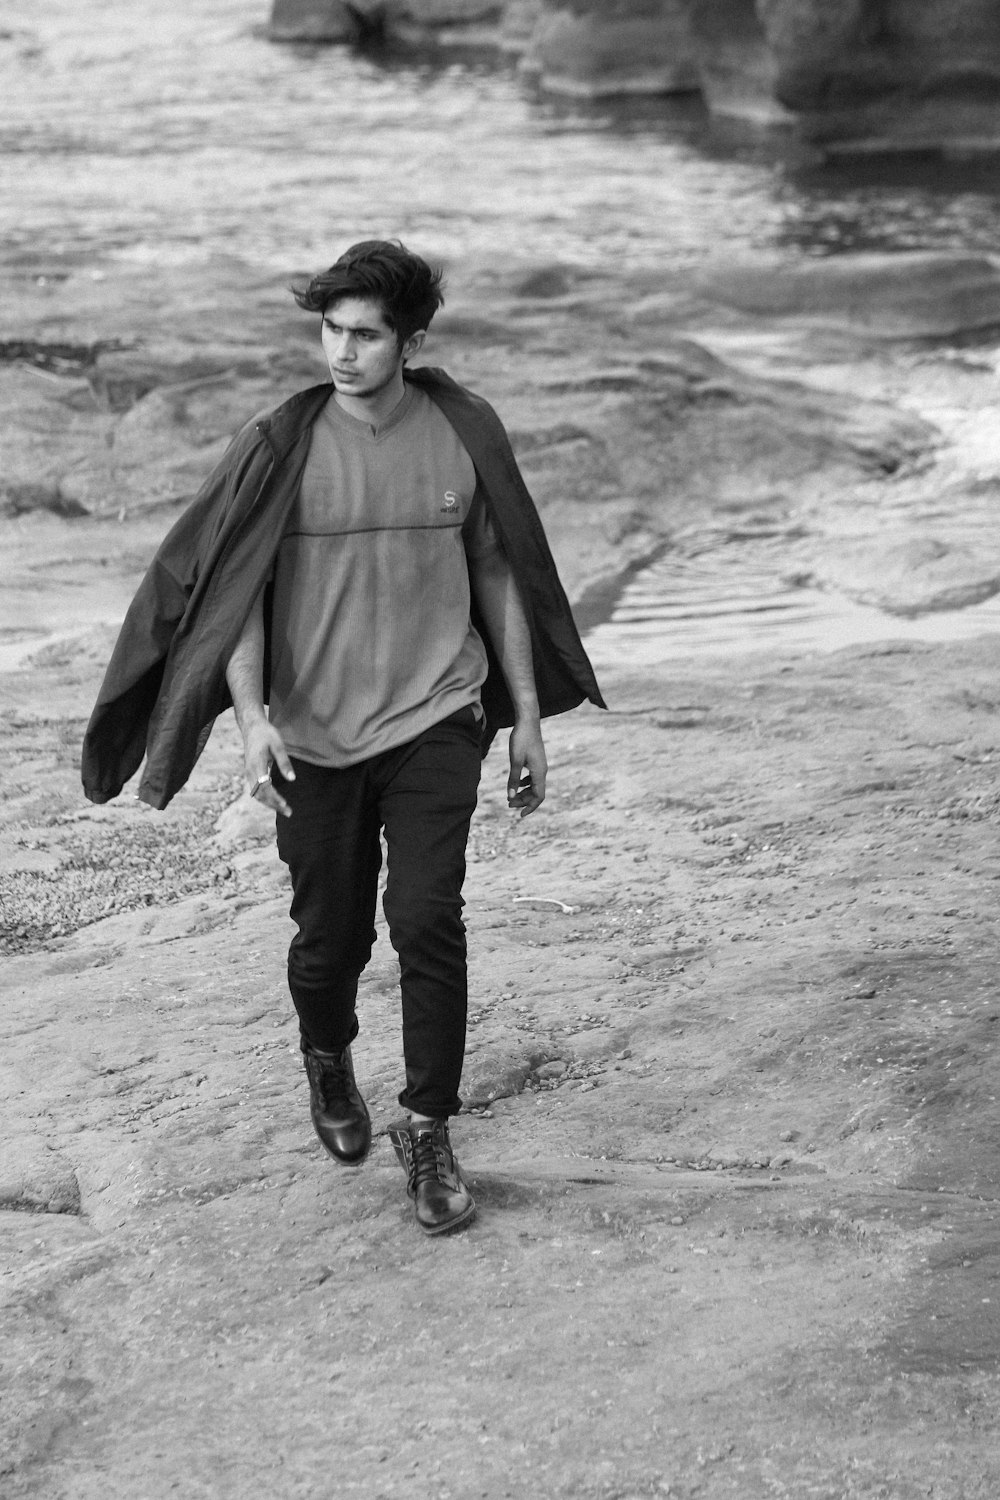 a black and white photo of a man walking on a beach